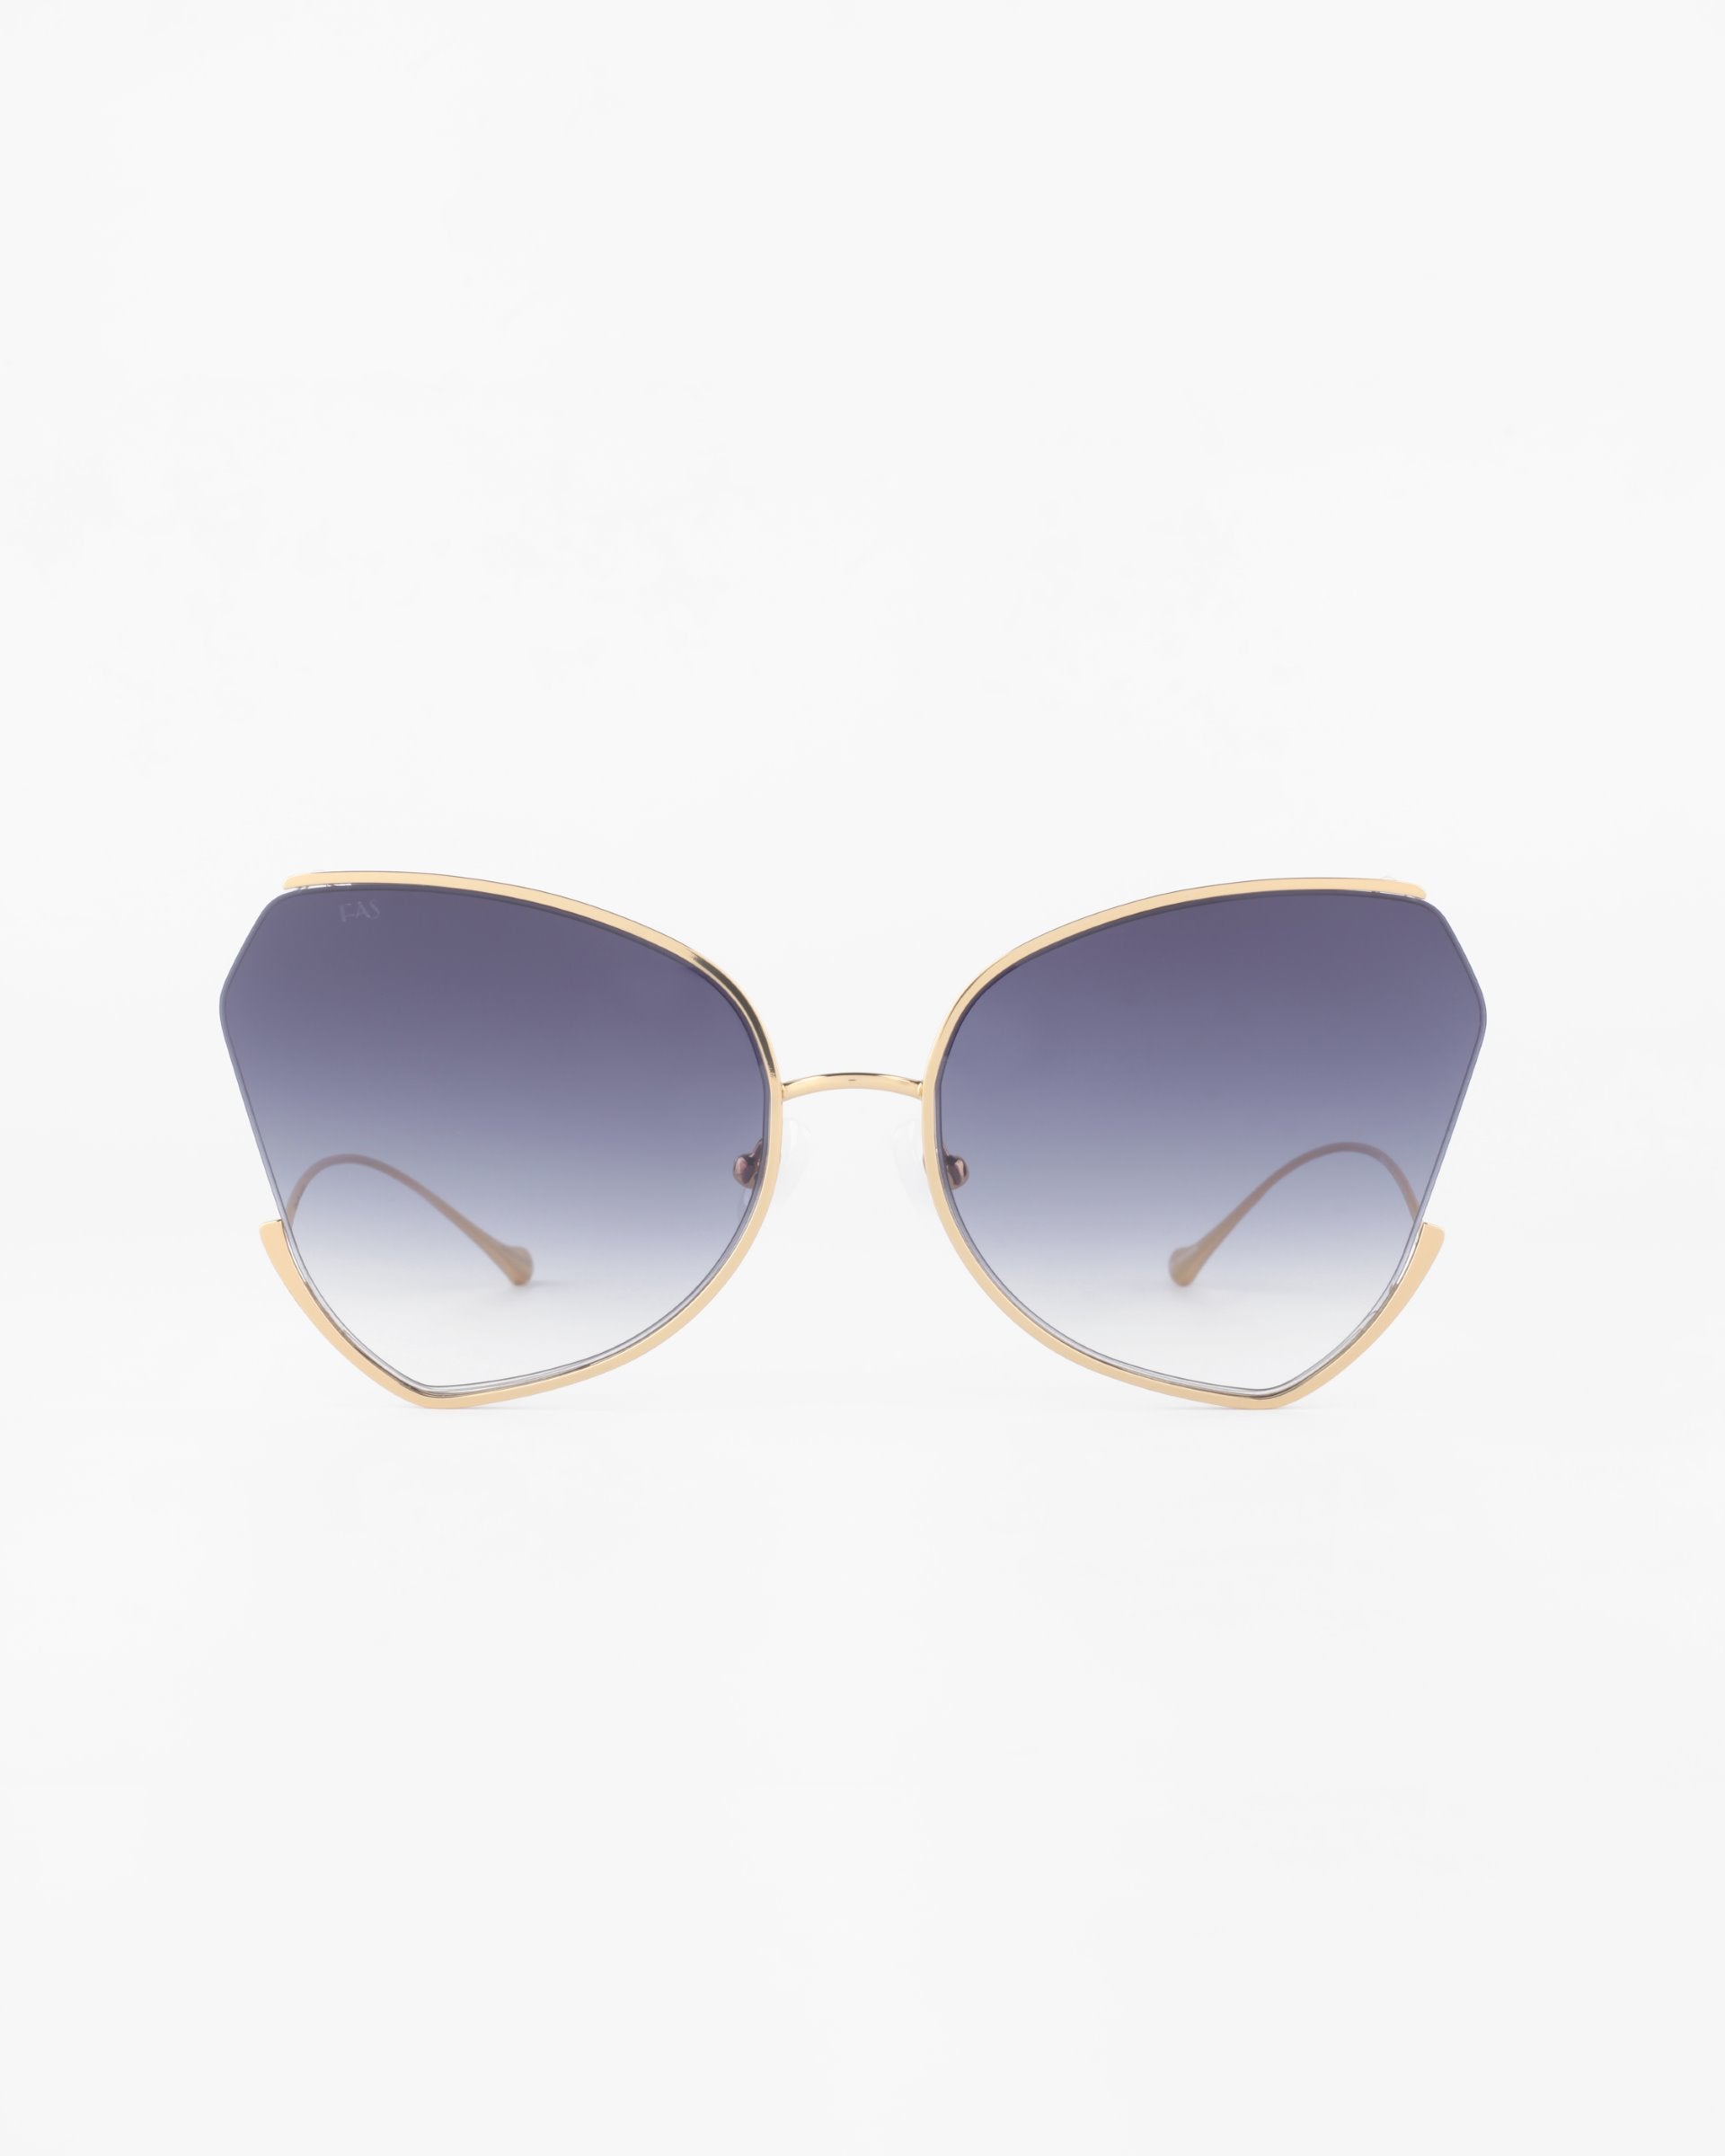 A pair of stylish For Art&#39;s Sake® Watercolour sunglasses with large, ombré lenses that fade from dark at the top to light at the bottom. The frame is thin and gold-plated stainless steel, featuring a unique butterfly silhouette that gives it a fashionable, modern look.